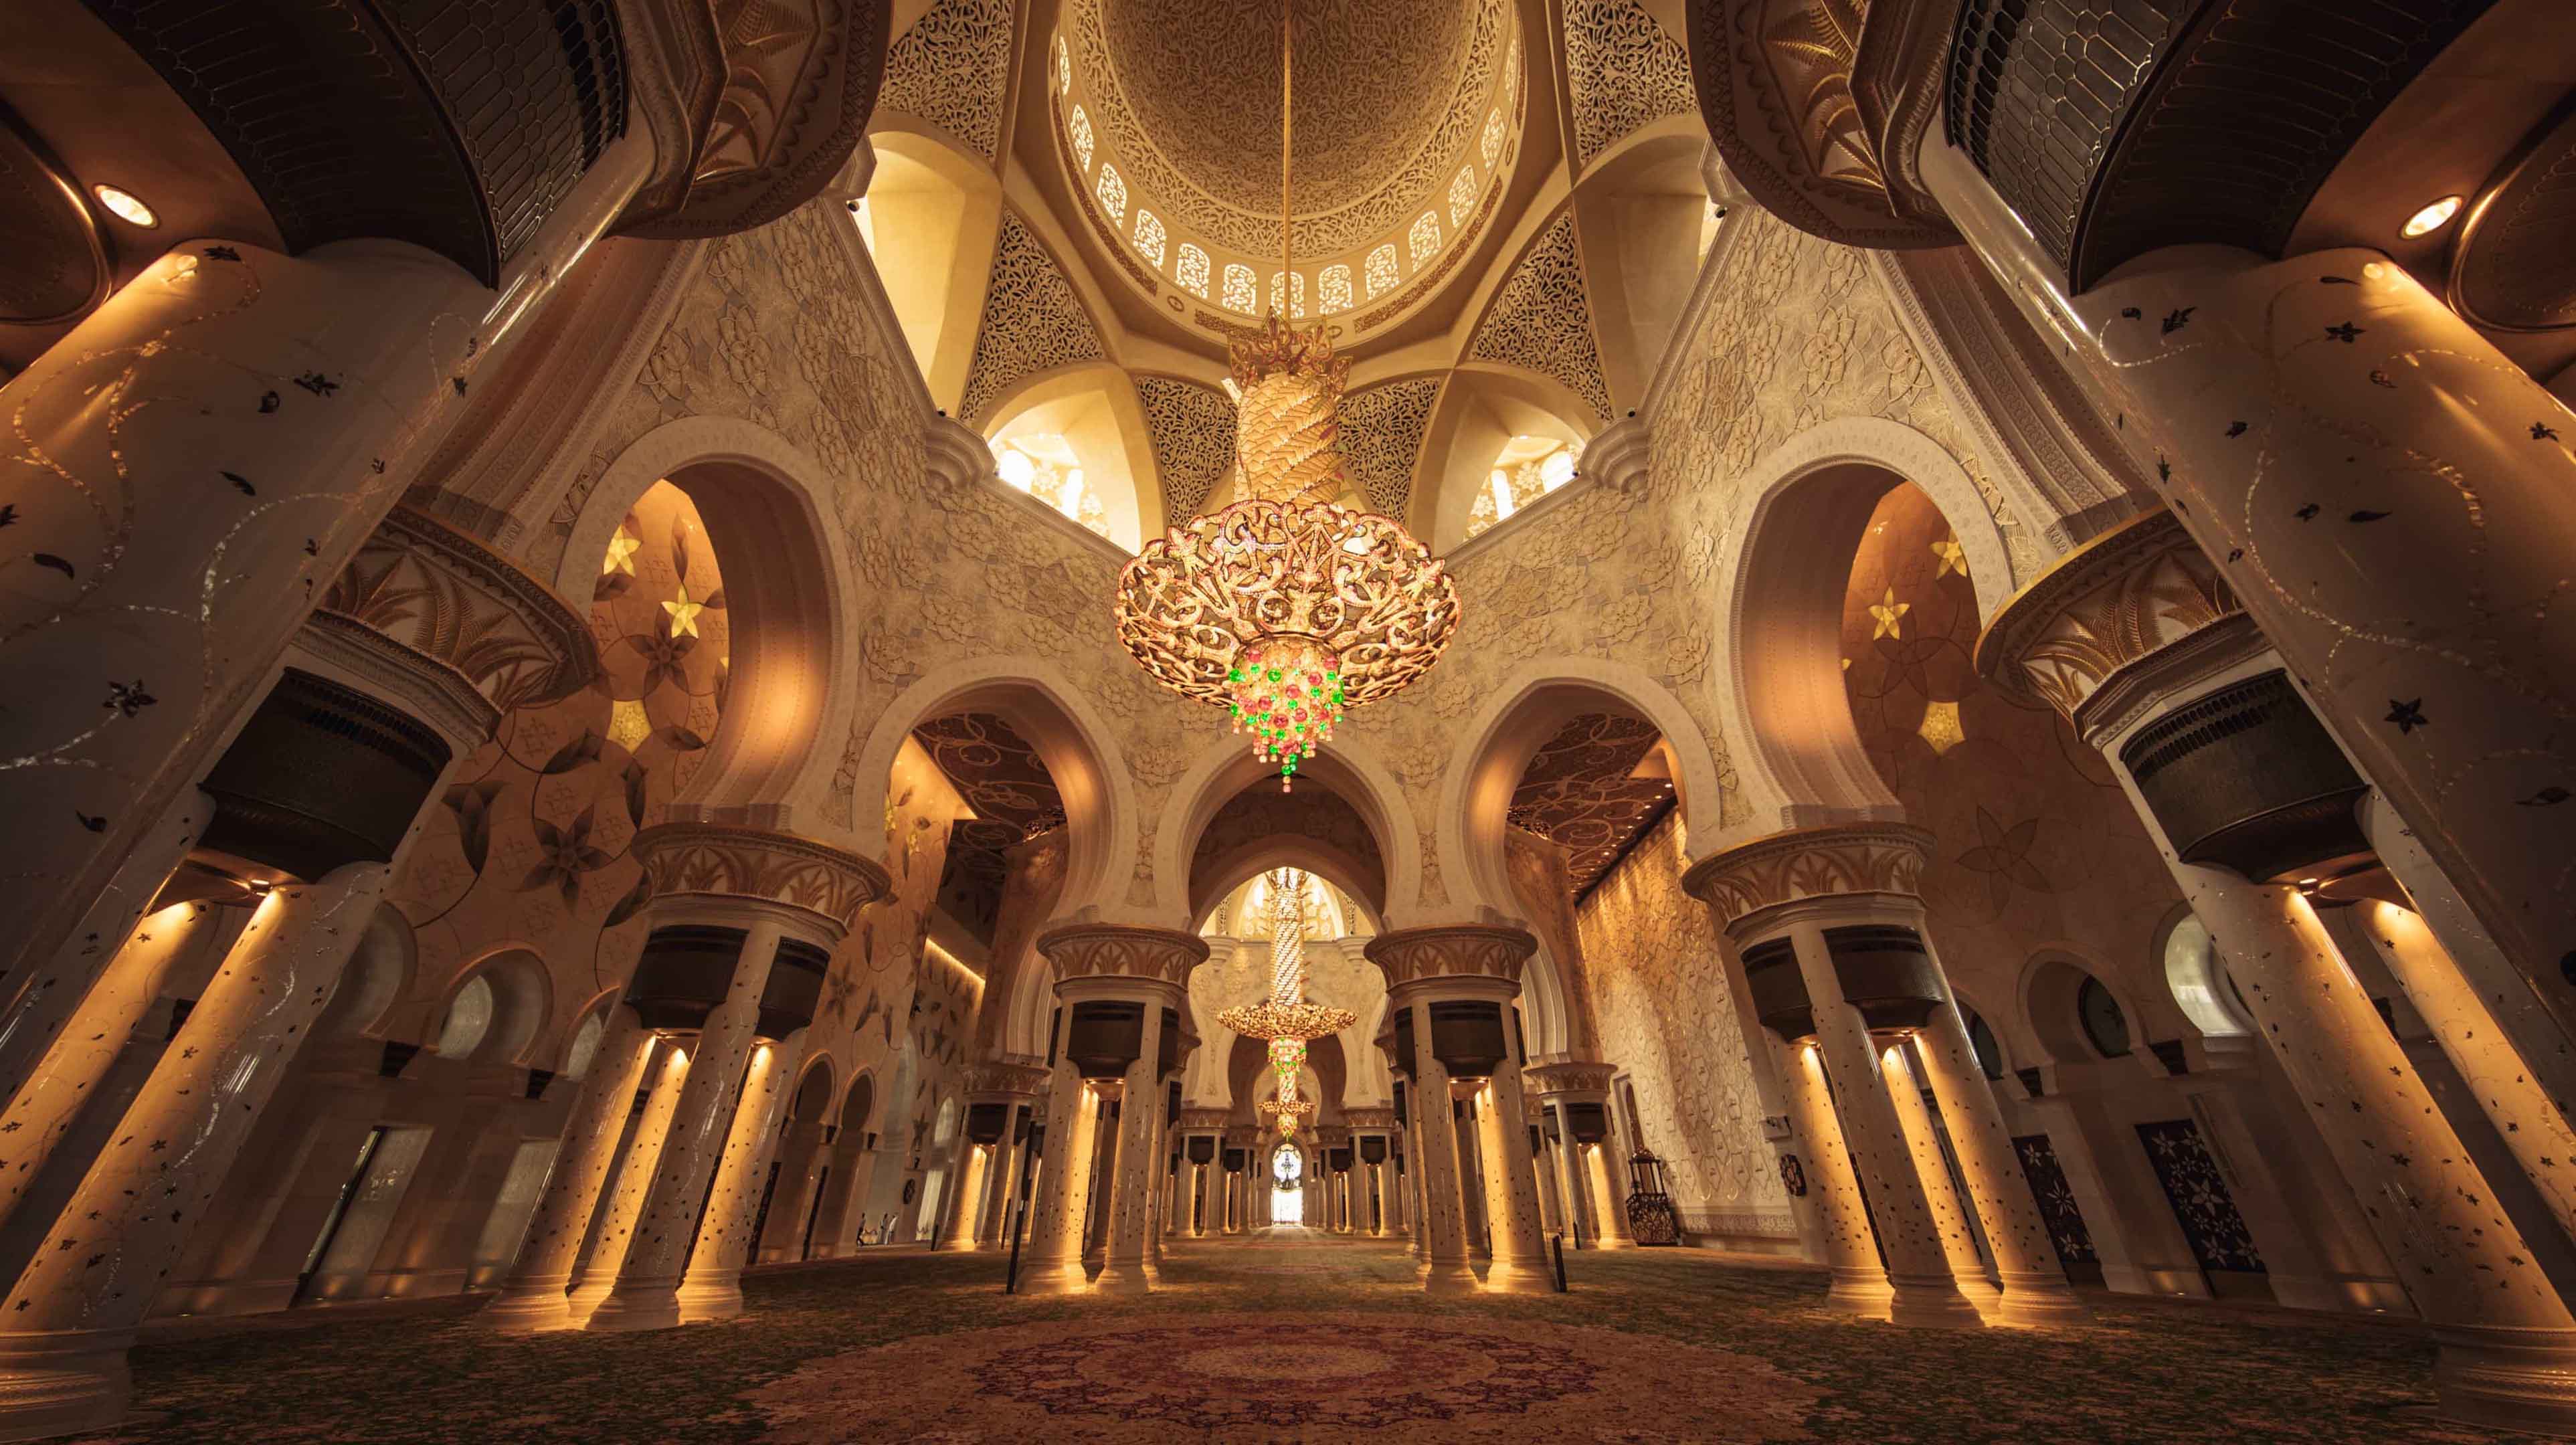 Sheikh Zayed Grand Mosque interior domes lit up